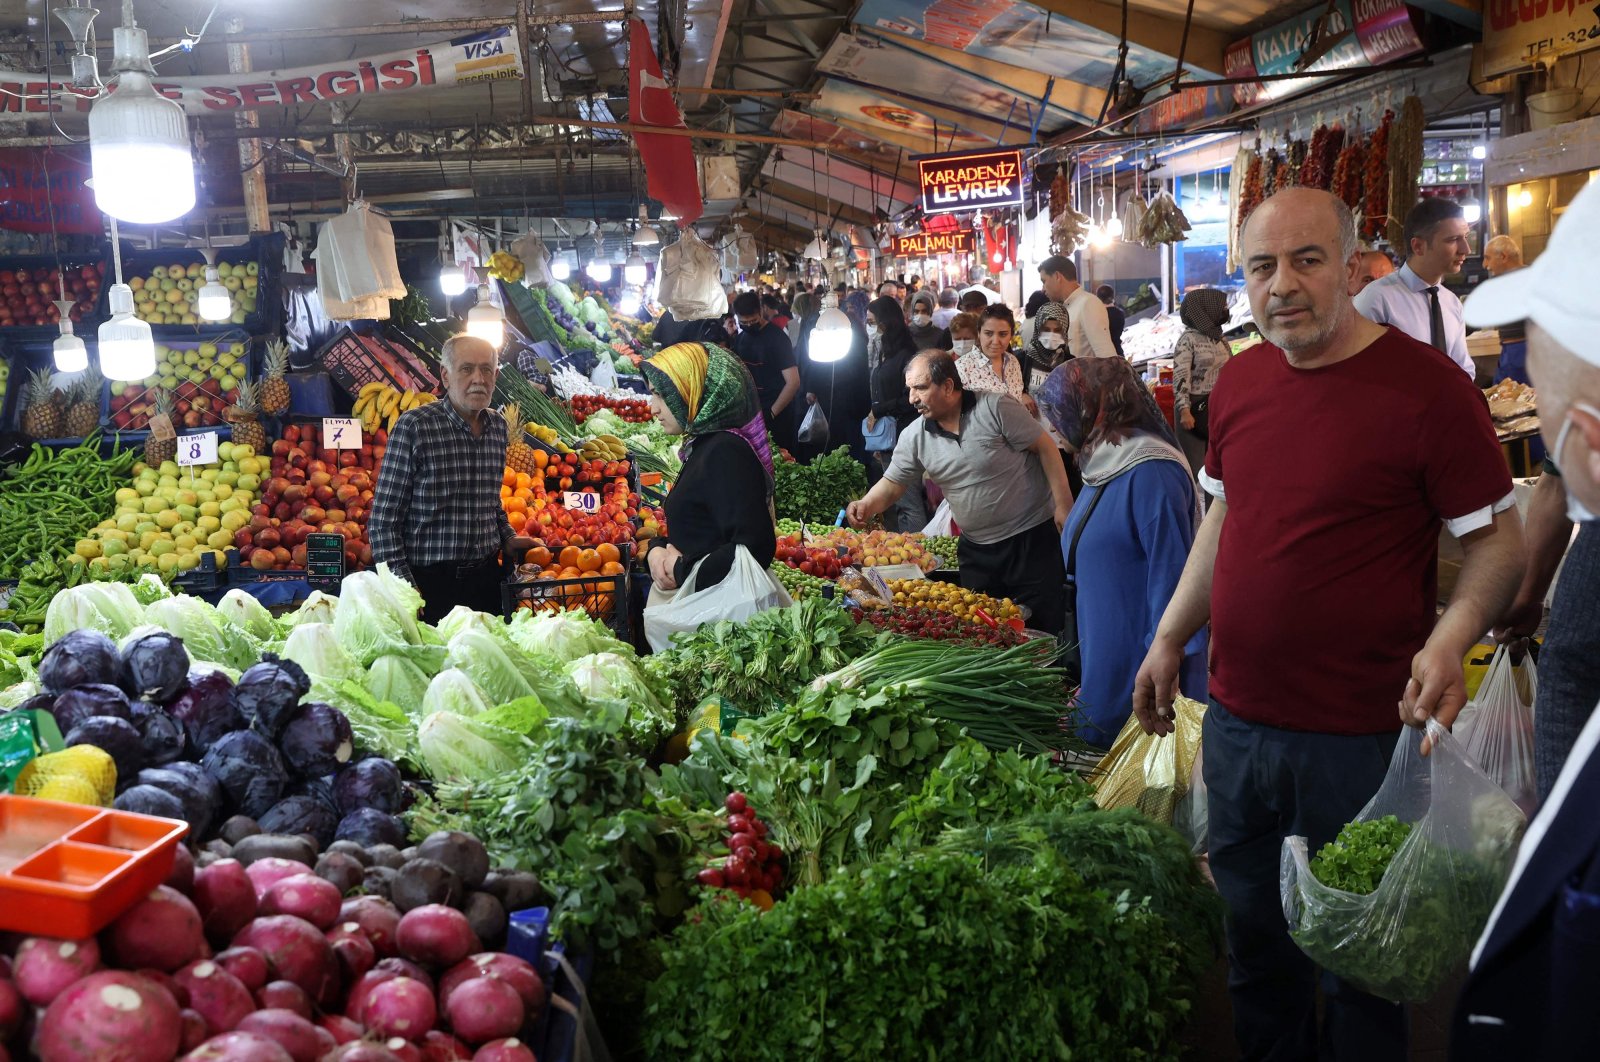 People shop at the vegetable and fruit market in the historical Ulus district of Ankara, Turkey, April 29, 2022. (AFP Photo)